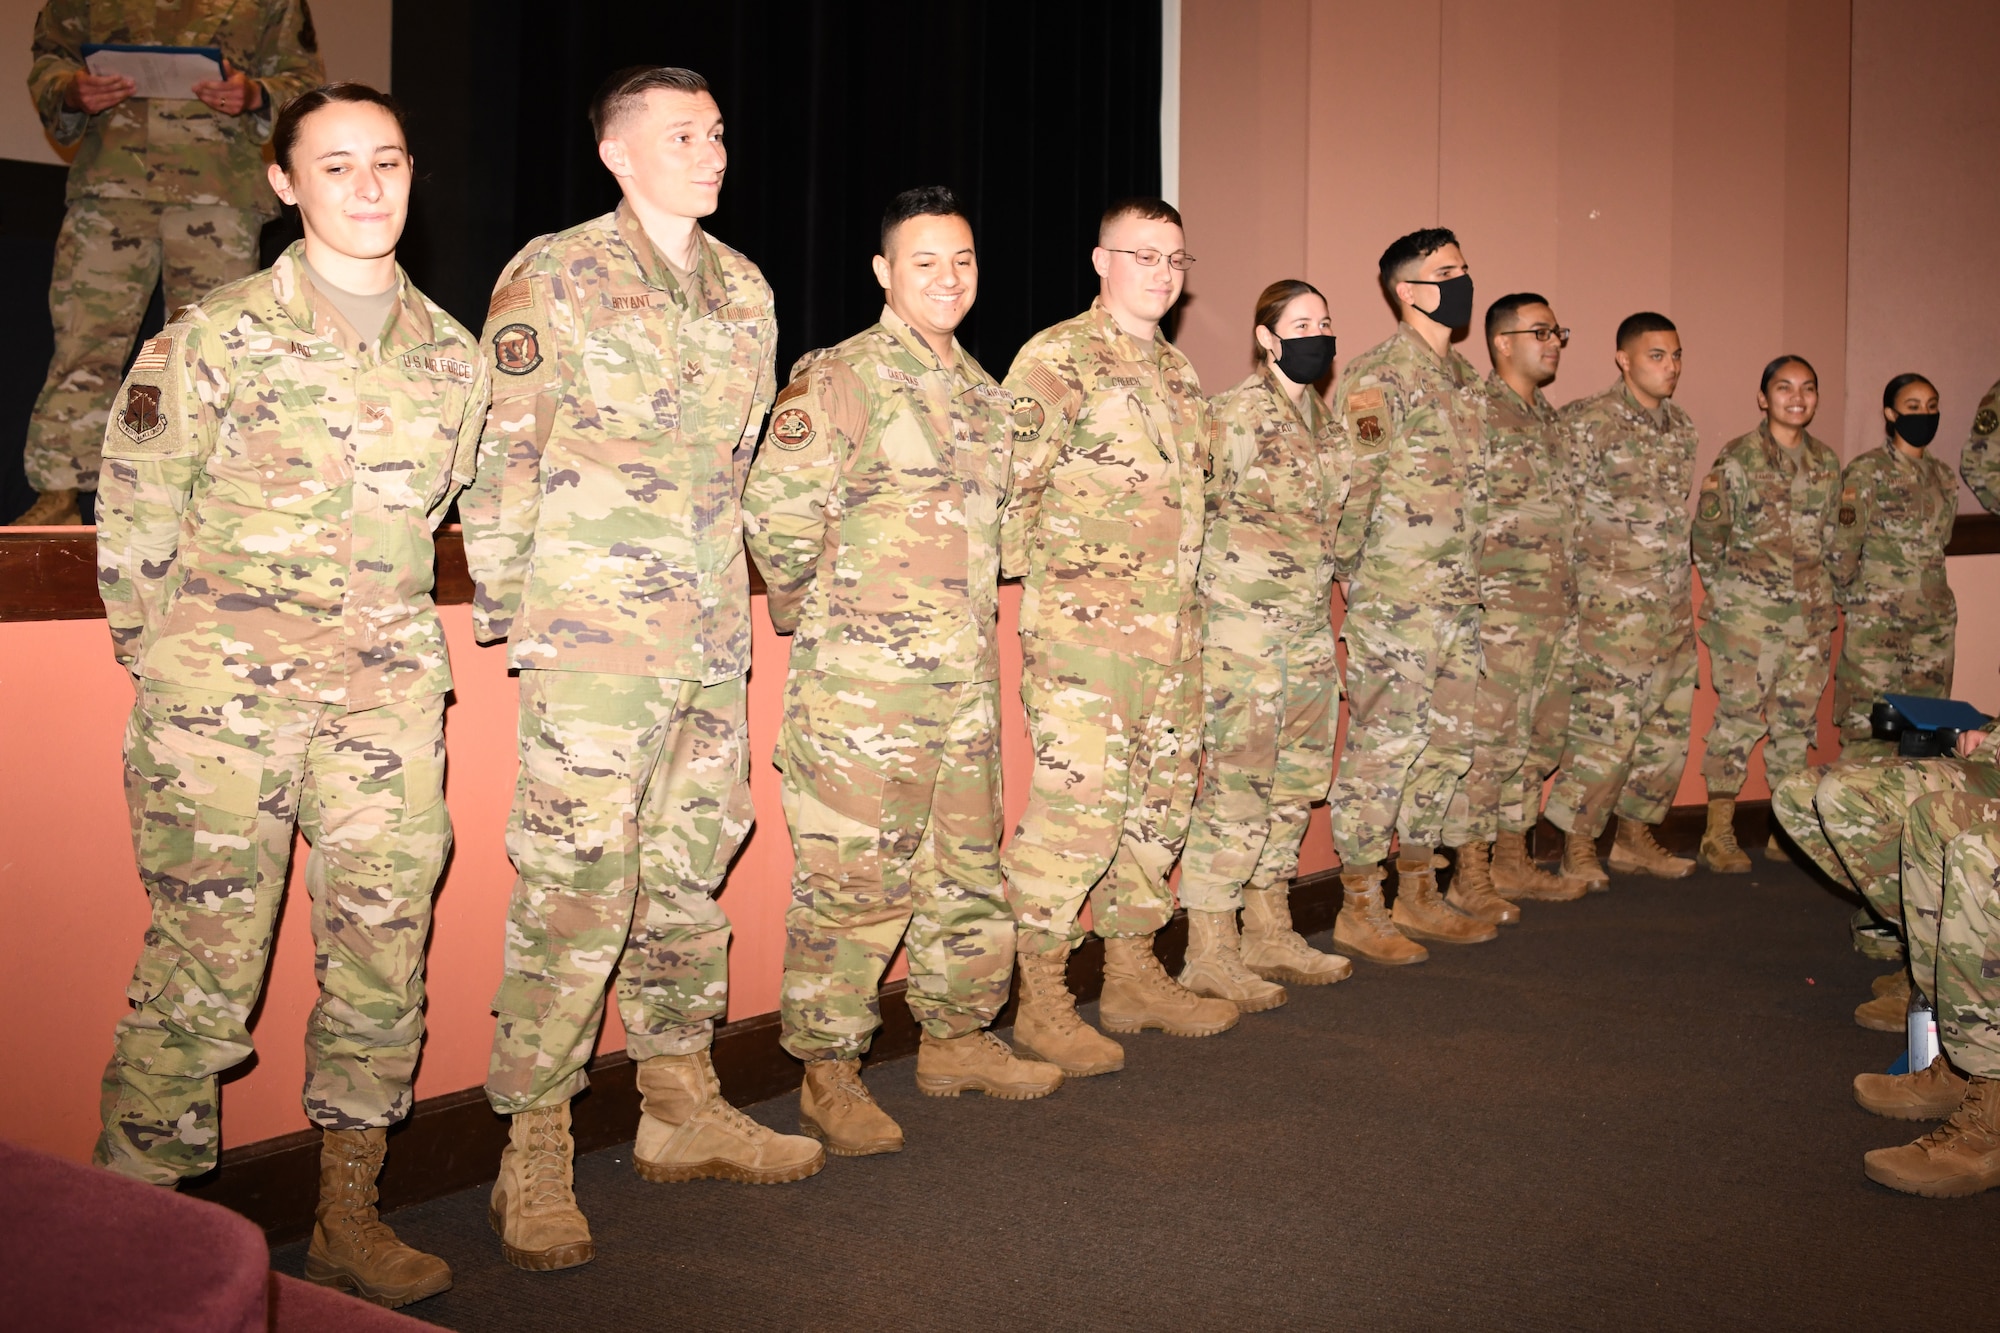 Members of the Honey Badger flight of ALS Class 21-F stand for recognition during their class graduation July 15, 2021, in the base theater on F. E. Warren Air Force Base, Wyo. ALS is a six-week course designed to prepare Airmen to assume supervisory duties as well as instruction in the practice of leadership and followership. Enlisted Airmen must graduate before supervising other Airmen. (U. S. Air Force photo by Airman 1st Class Charles Munoz)